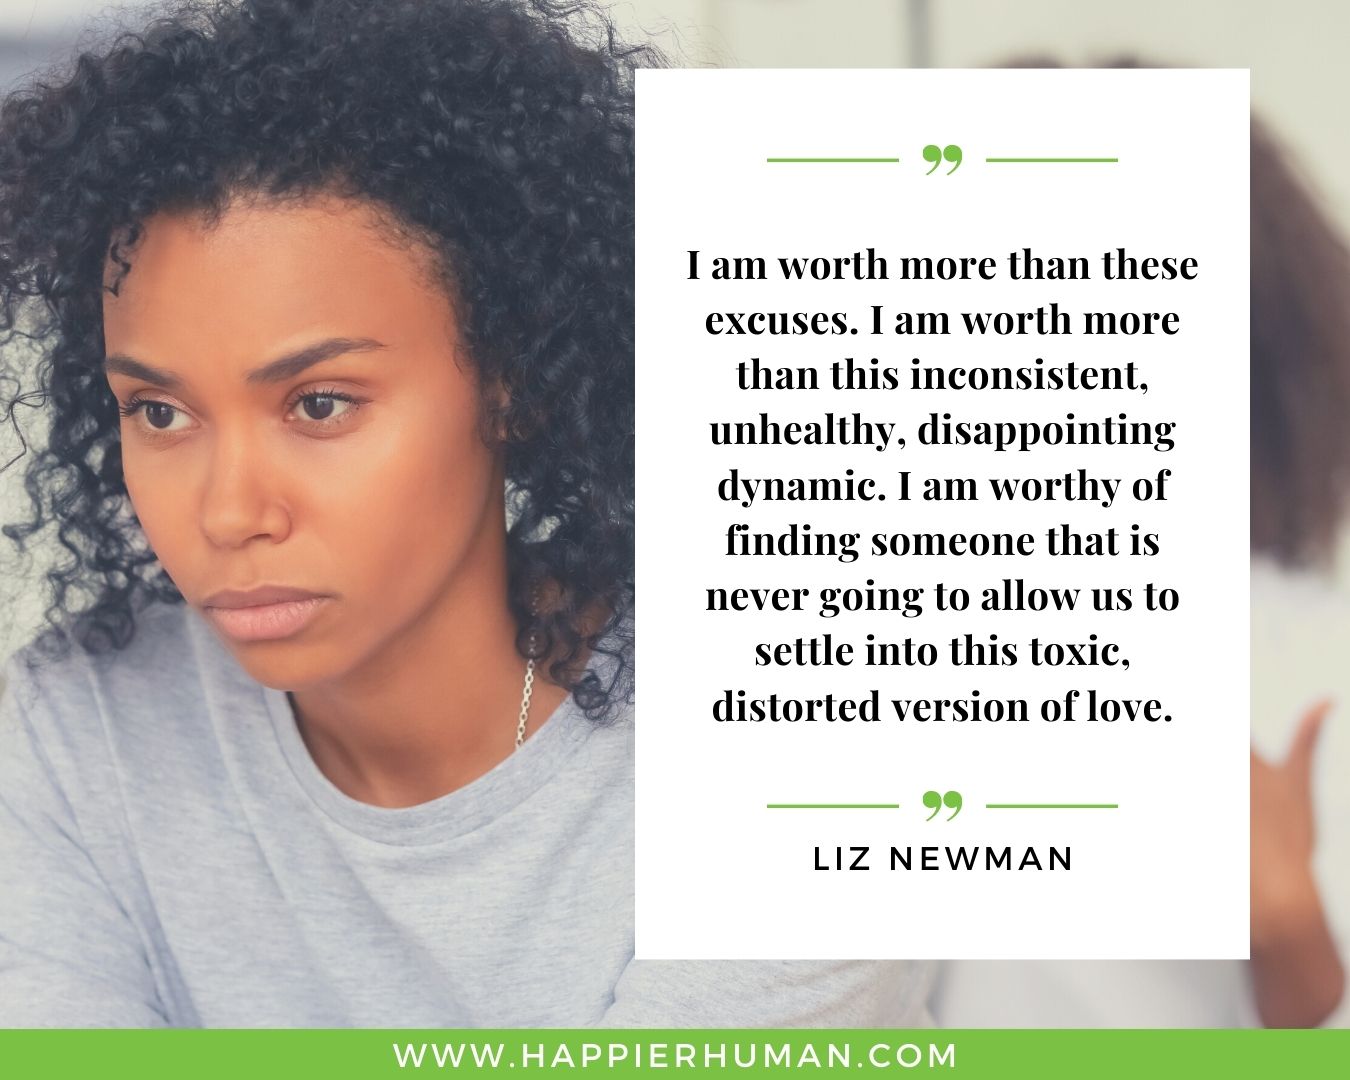 Toxic People Quotes - “I am worth more than these excuses. I am worth more than this inconsistent, unhealthy, disappointing dynamic. I am worthy of finding someone that is never going to allow us to settle into this toxic, distorted version of love.” – Liz Newman